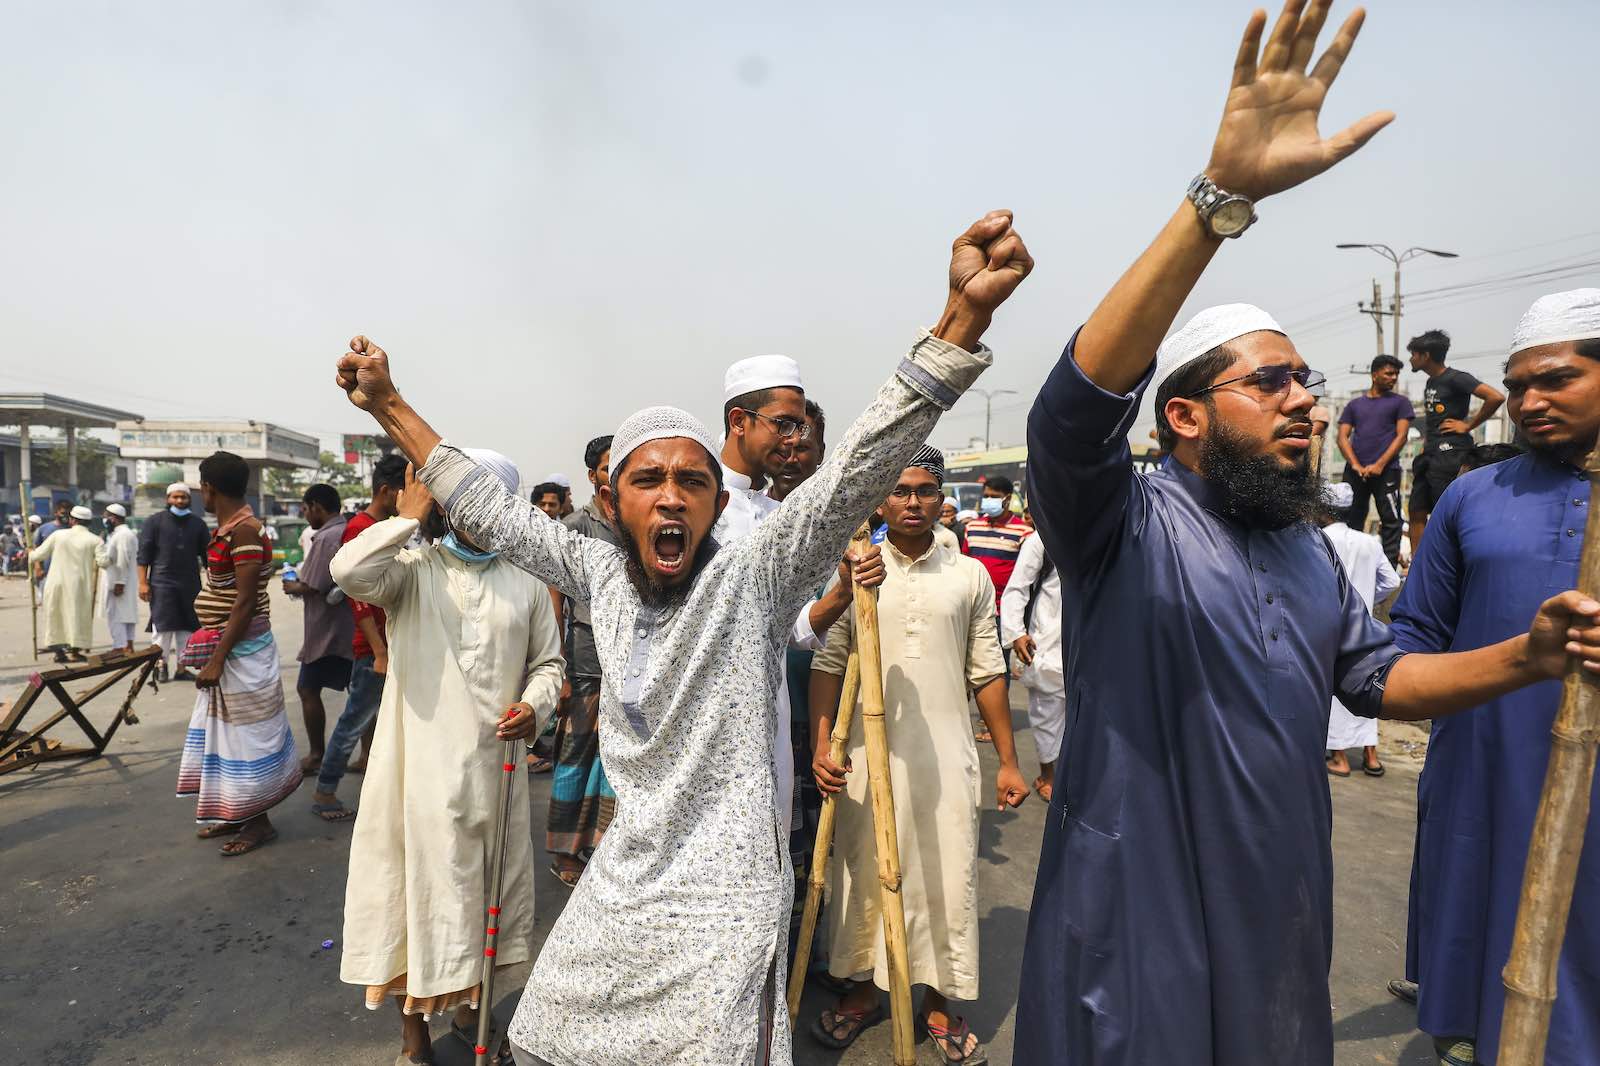 Bangladesh Religion and Politics: Getting the Mix Right